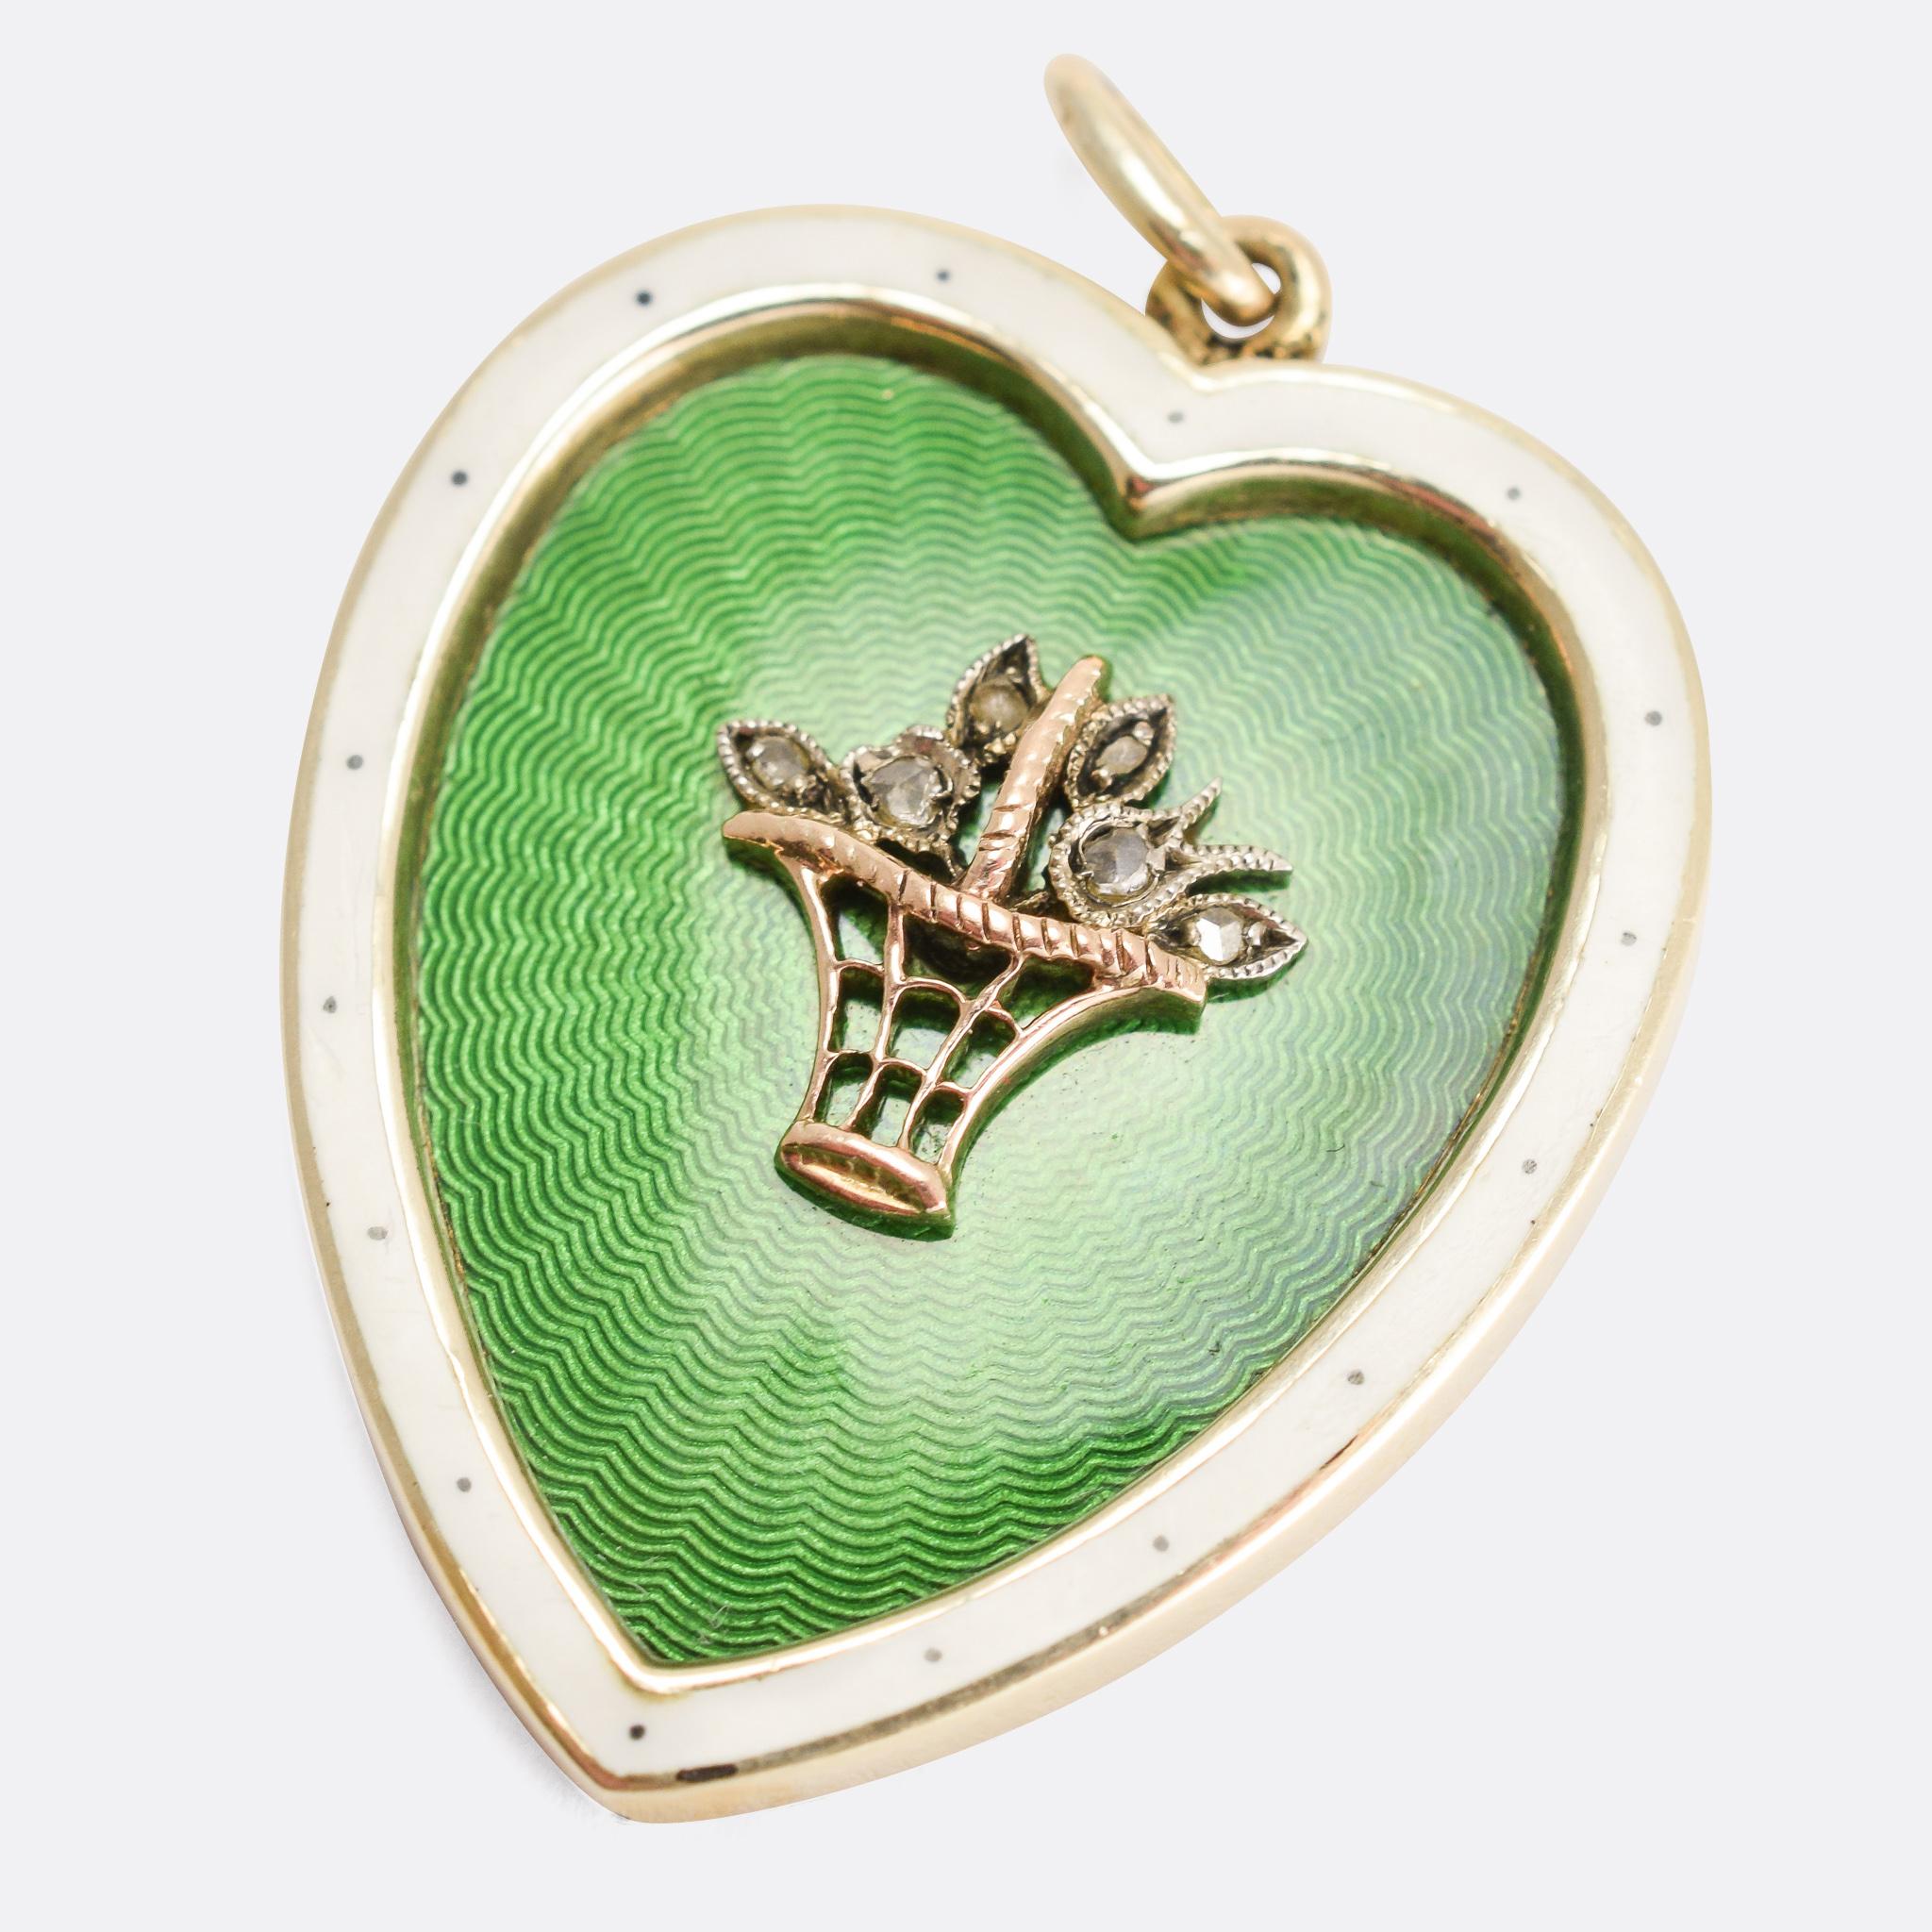 A stunning antique heart pendant dating from the turn of the 20th Century. Set with a diamond flower basket to the centre, within a sea of beautiful green guilloché enamel, and finished with a white enamel border. The craftsmanship is excellent